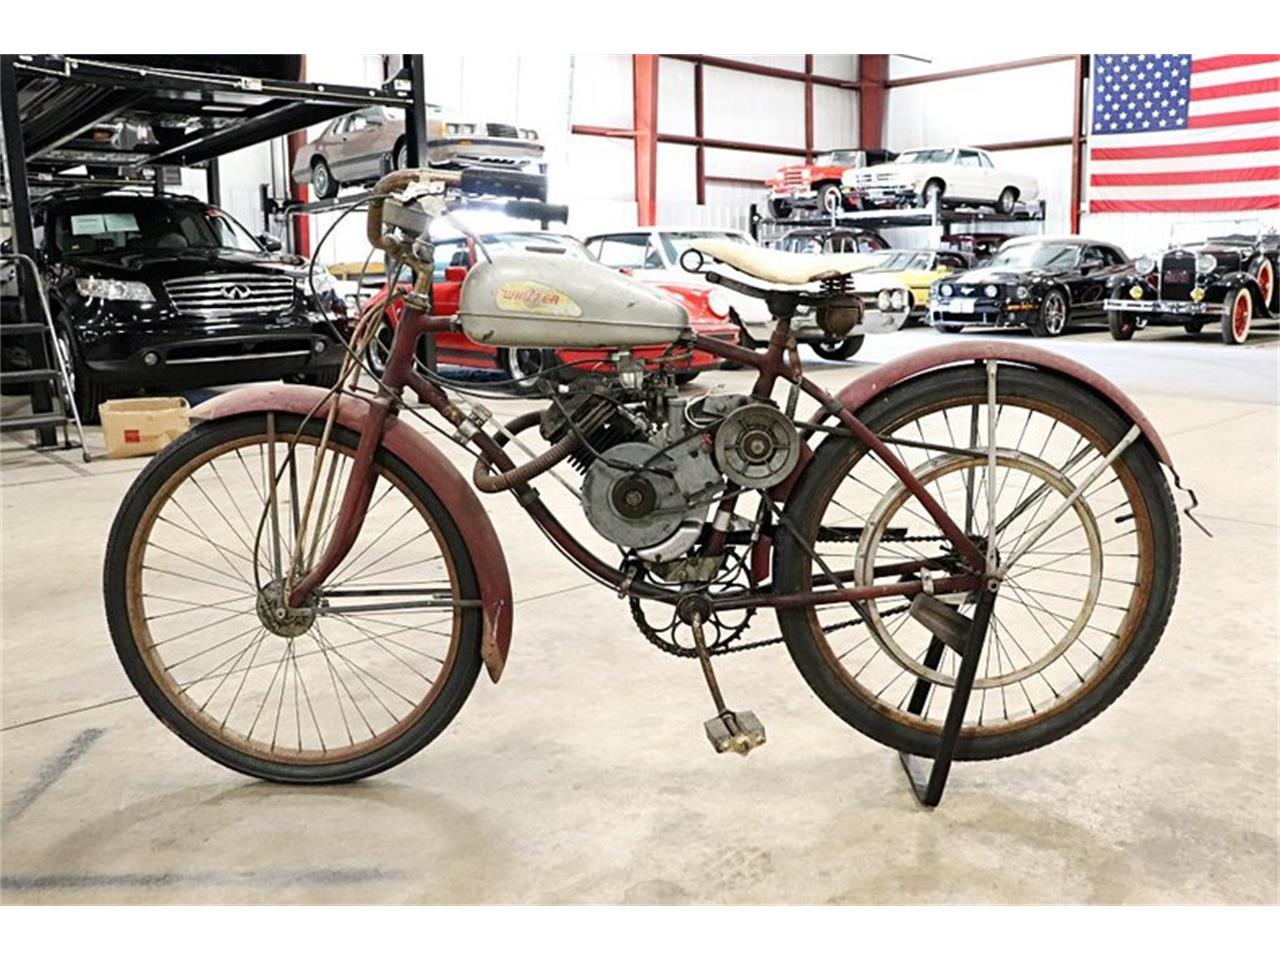 1940 Whizzer Motorcycle for Sale CC1208149